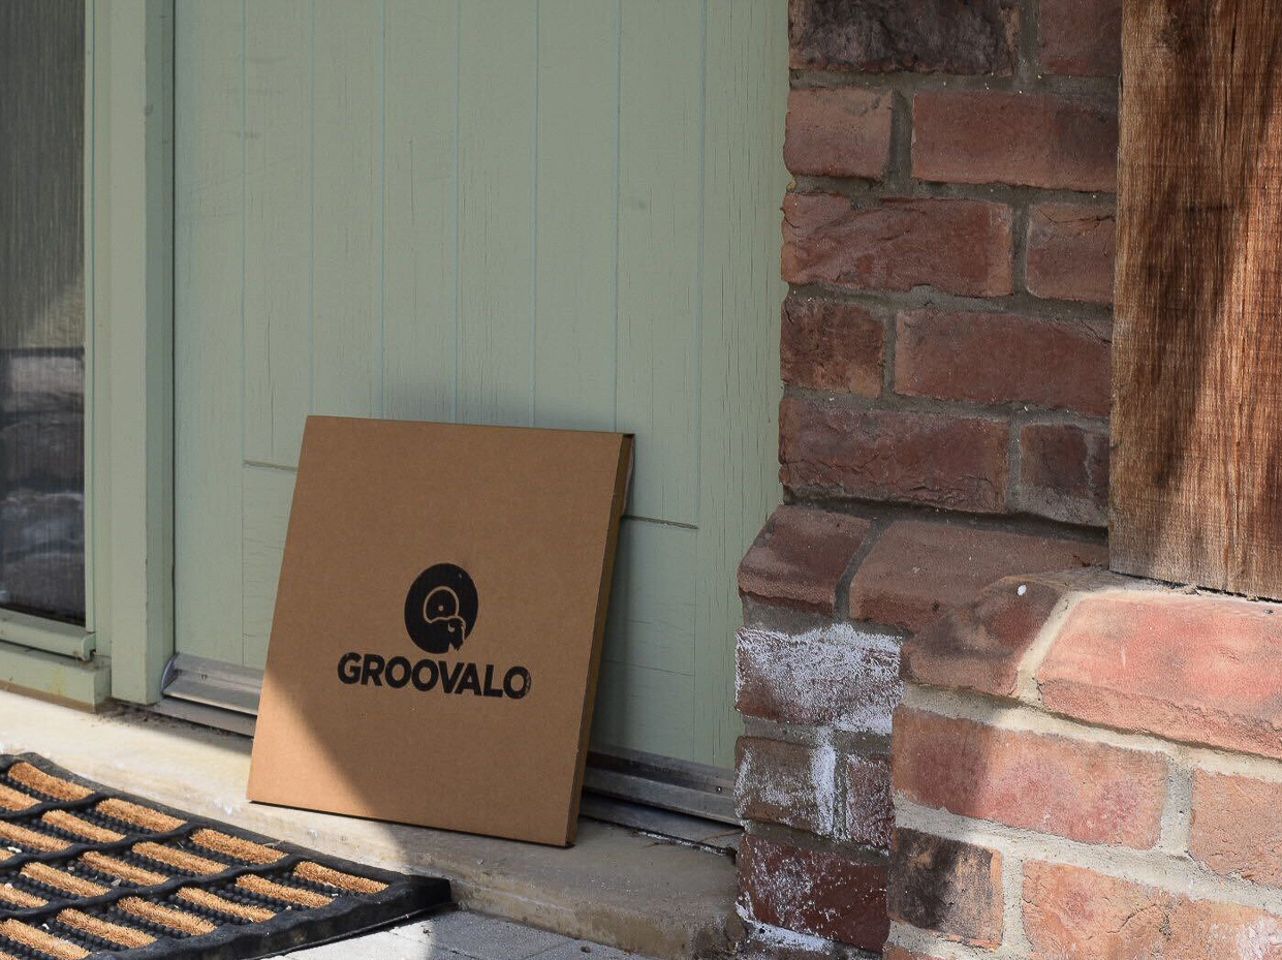 Groovalo vinyl delivery